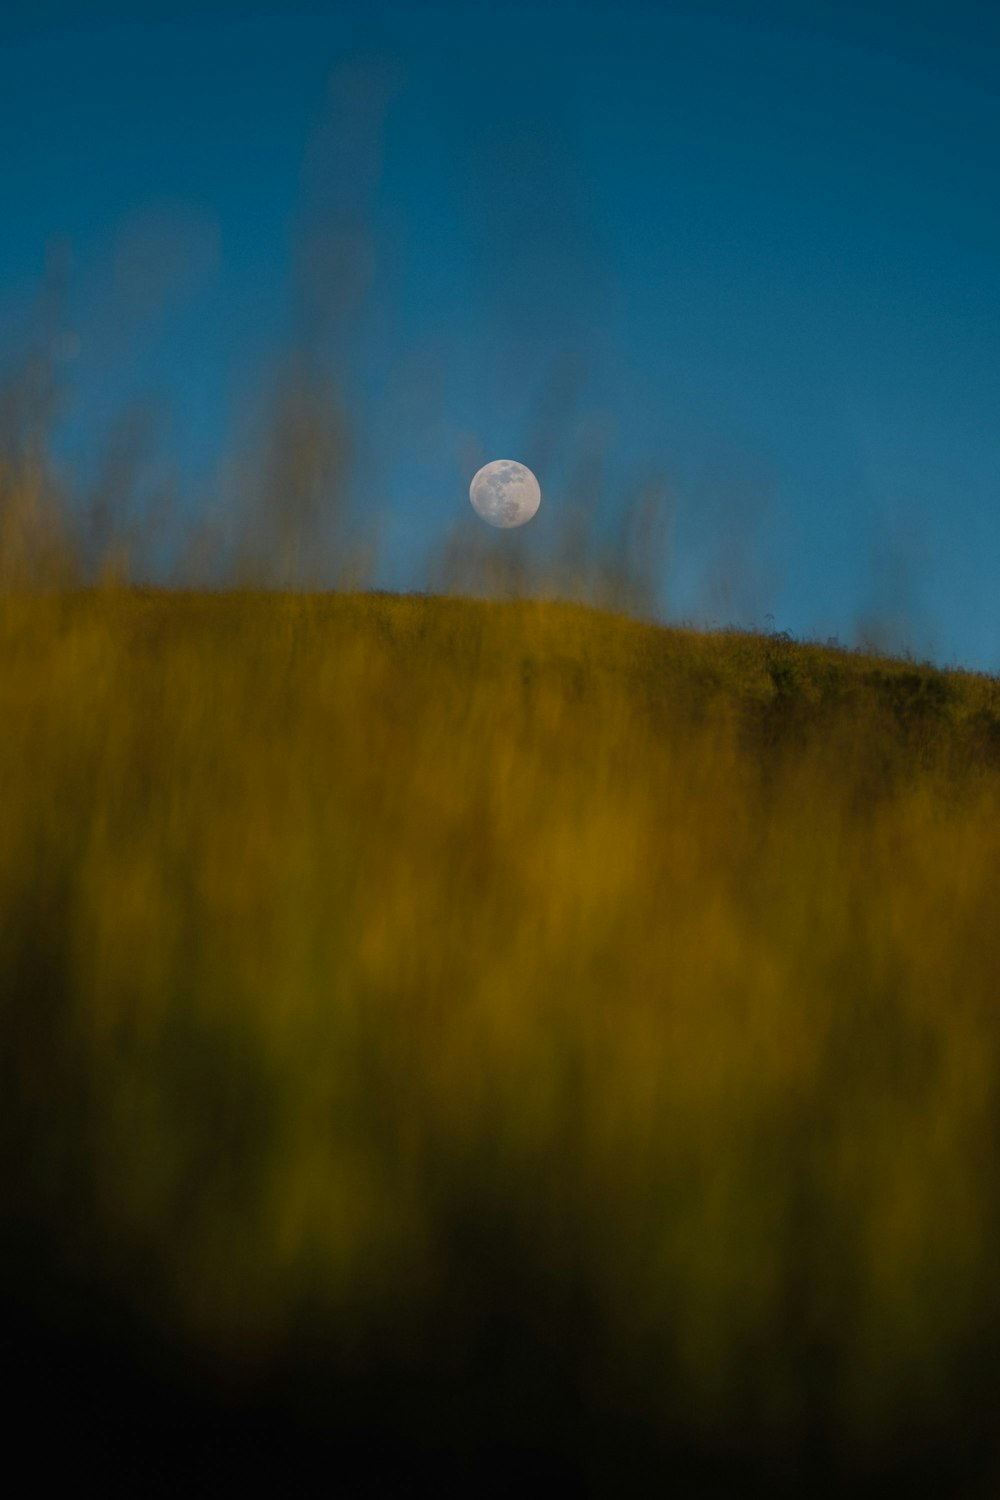 a full moon is seen in the distance over a grassy hill